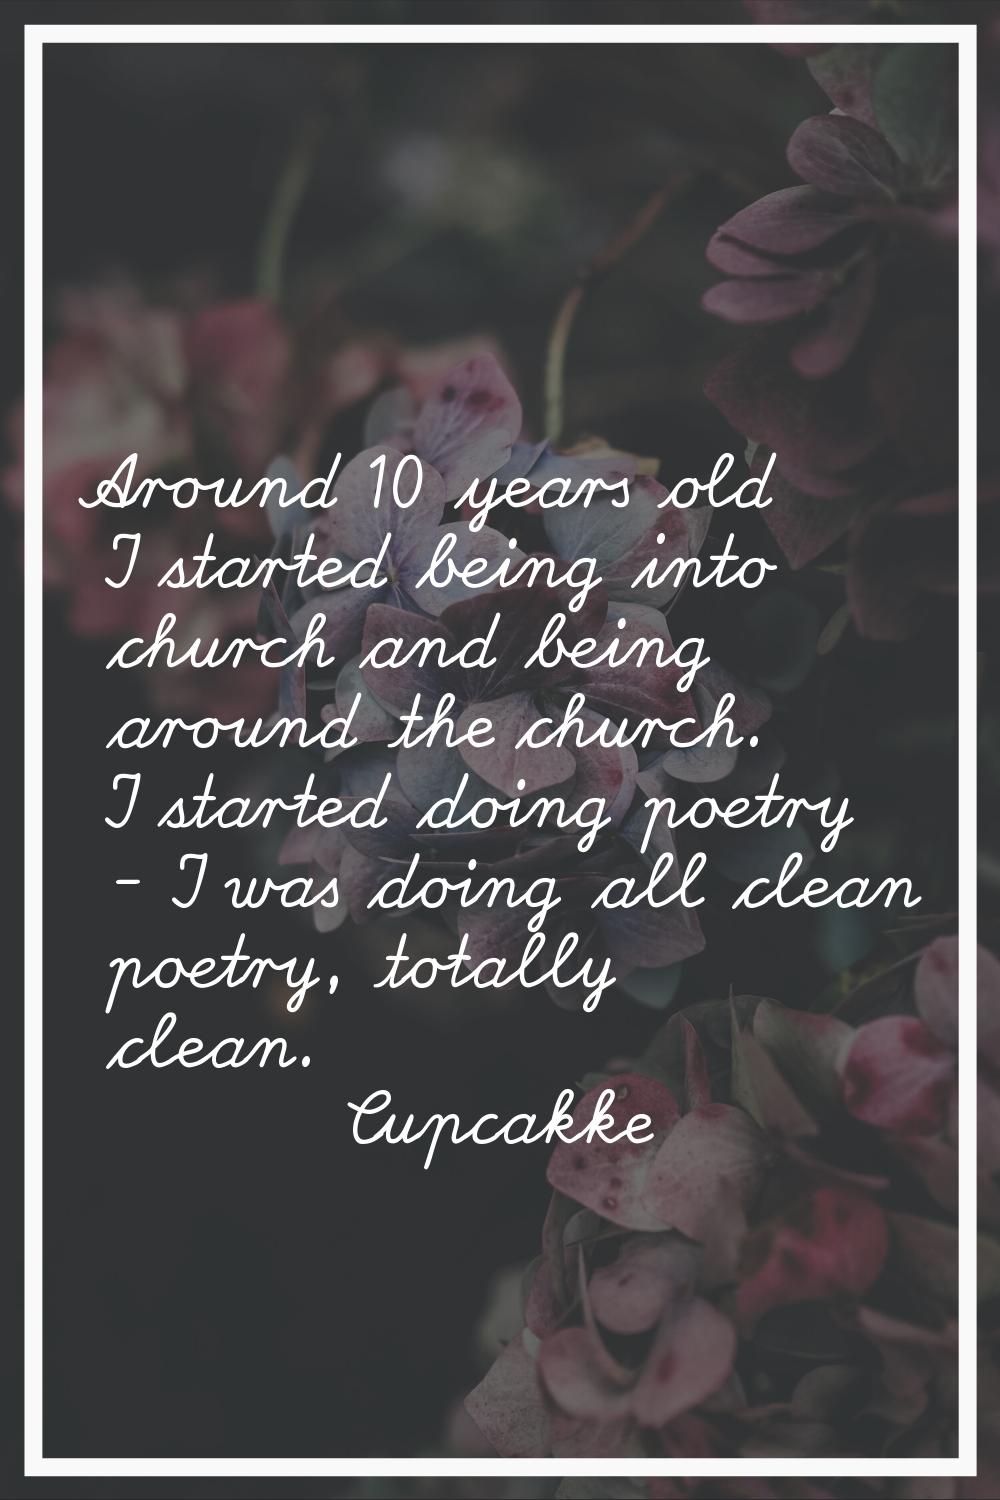 Around 10 years old I started being into church and being around the church. I started doing poetry